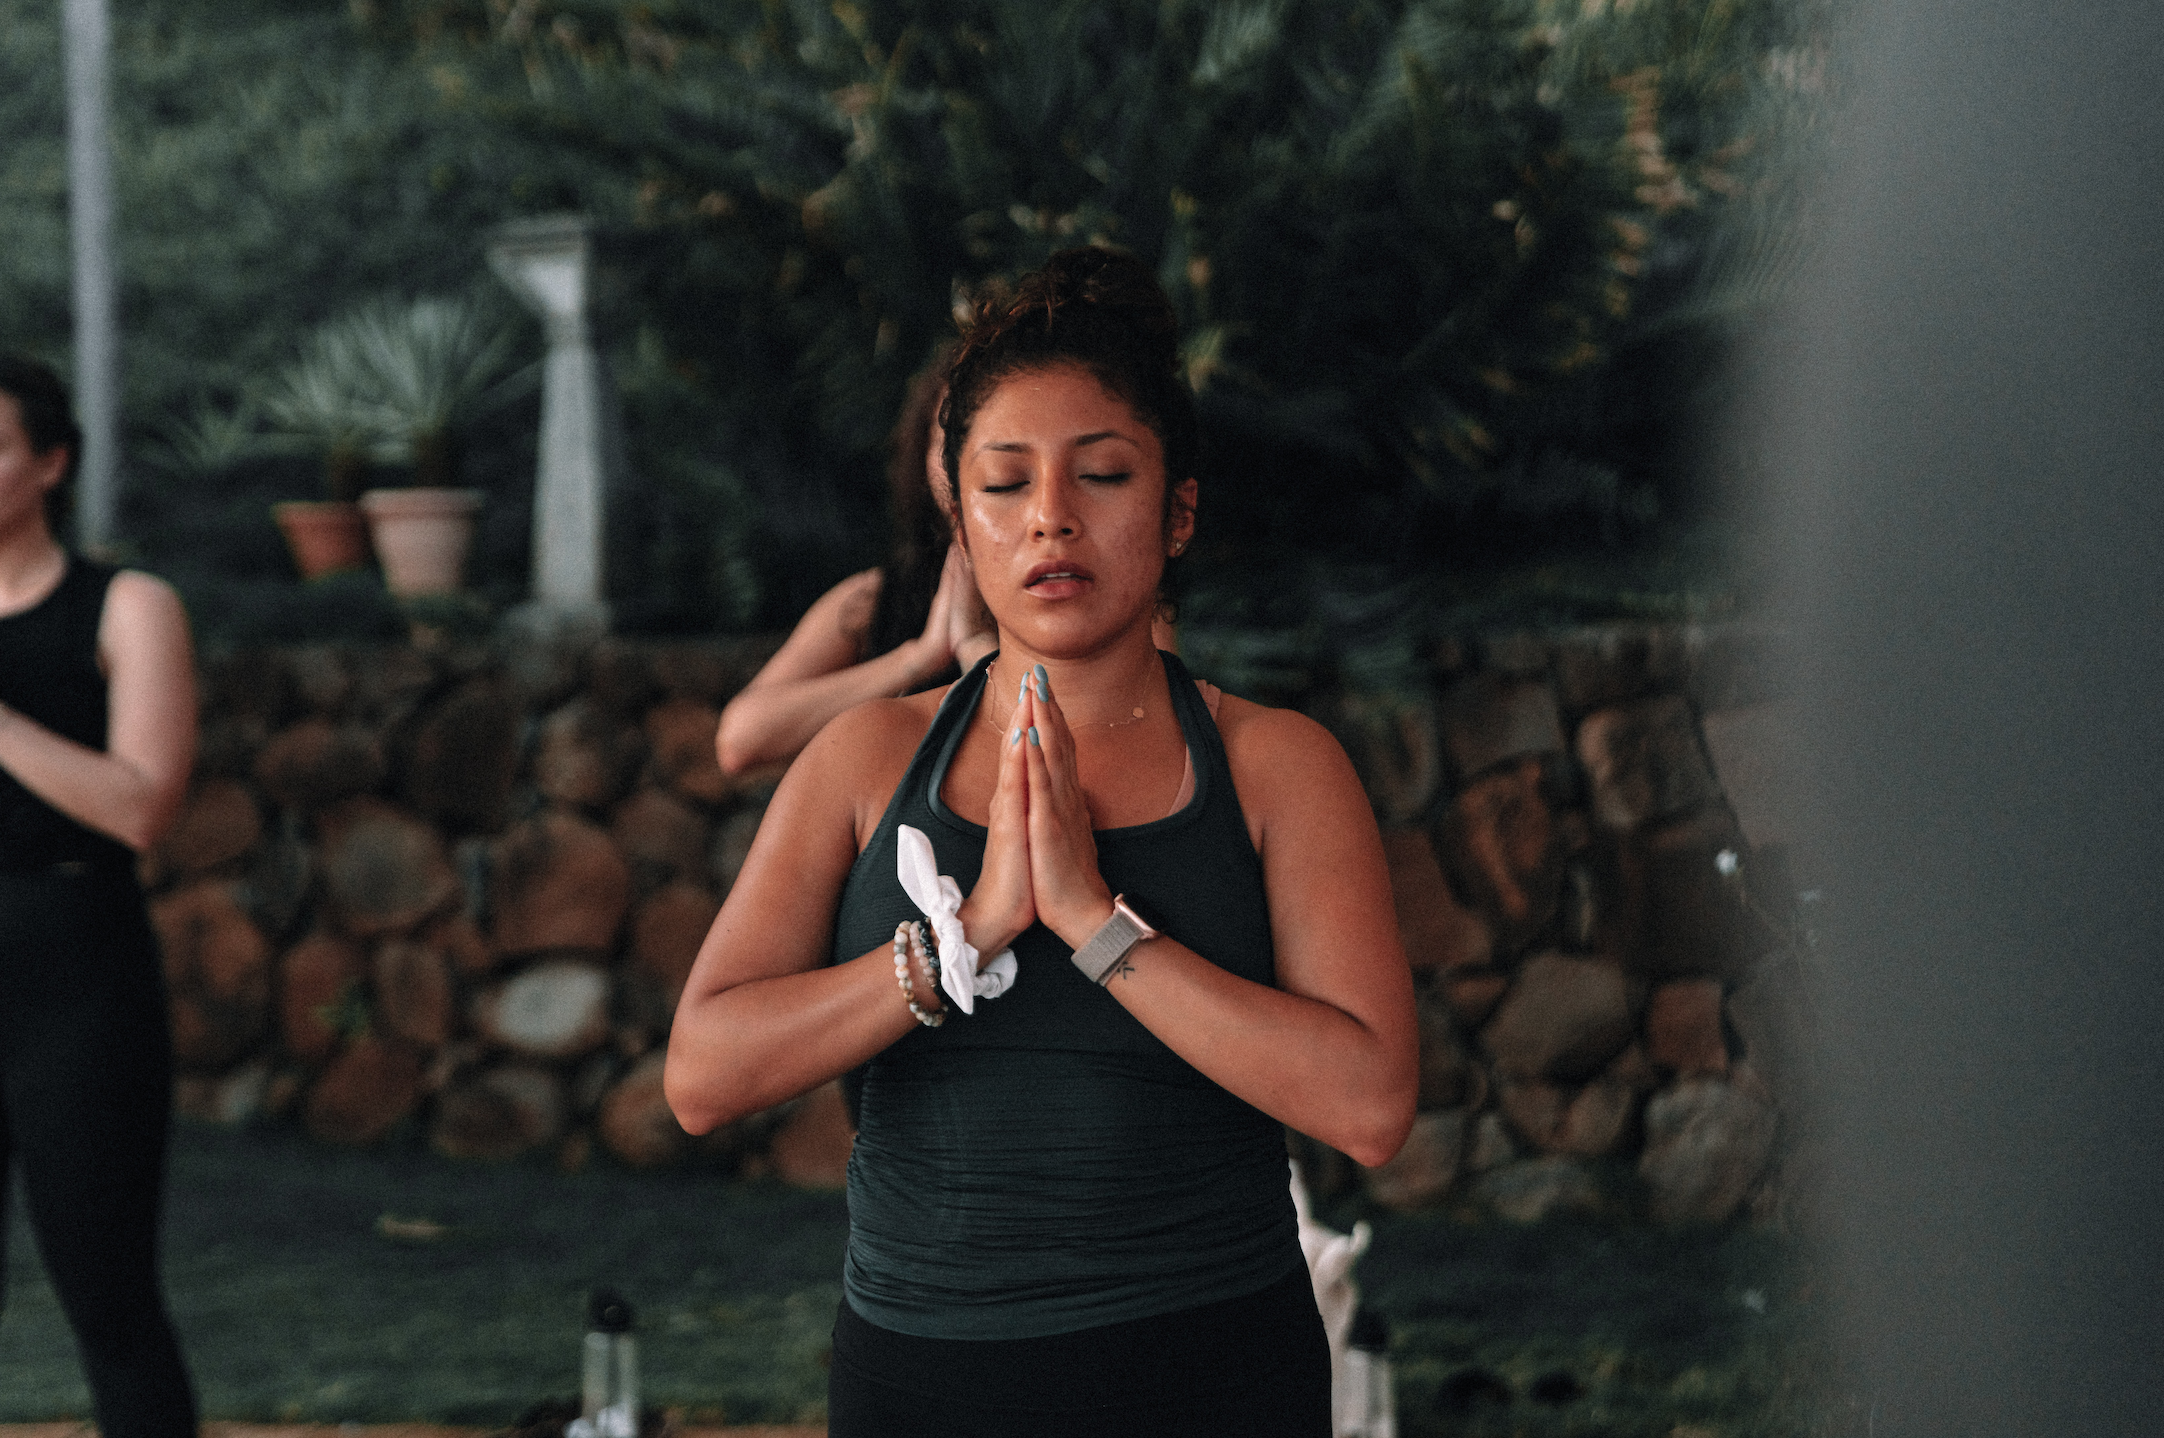 Breathing practices are important to control your mental and physical health. Here is an exercie to practice inhaling and exhaling.